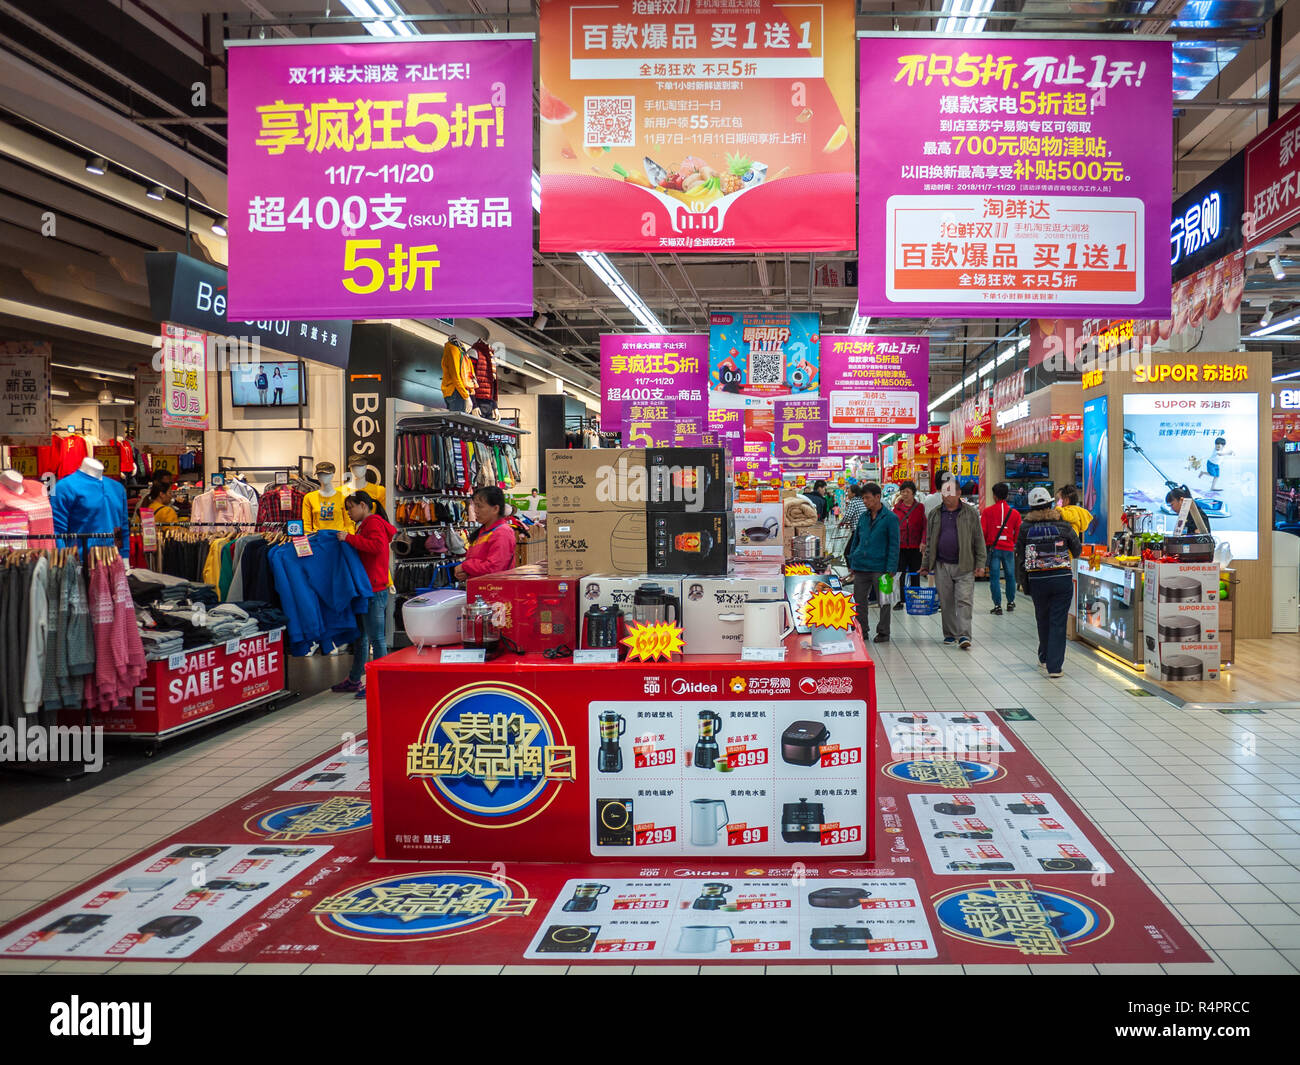 Interior of a modern supermarket with promotion advertisements all over the place. RT-mart, Liuzhou, China. Stock Photo